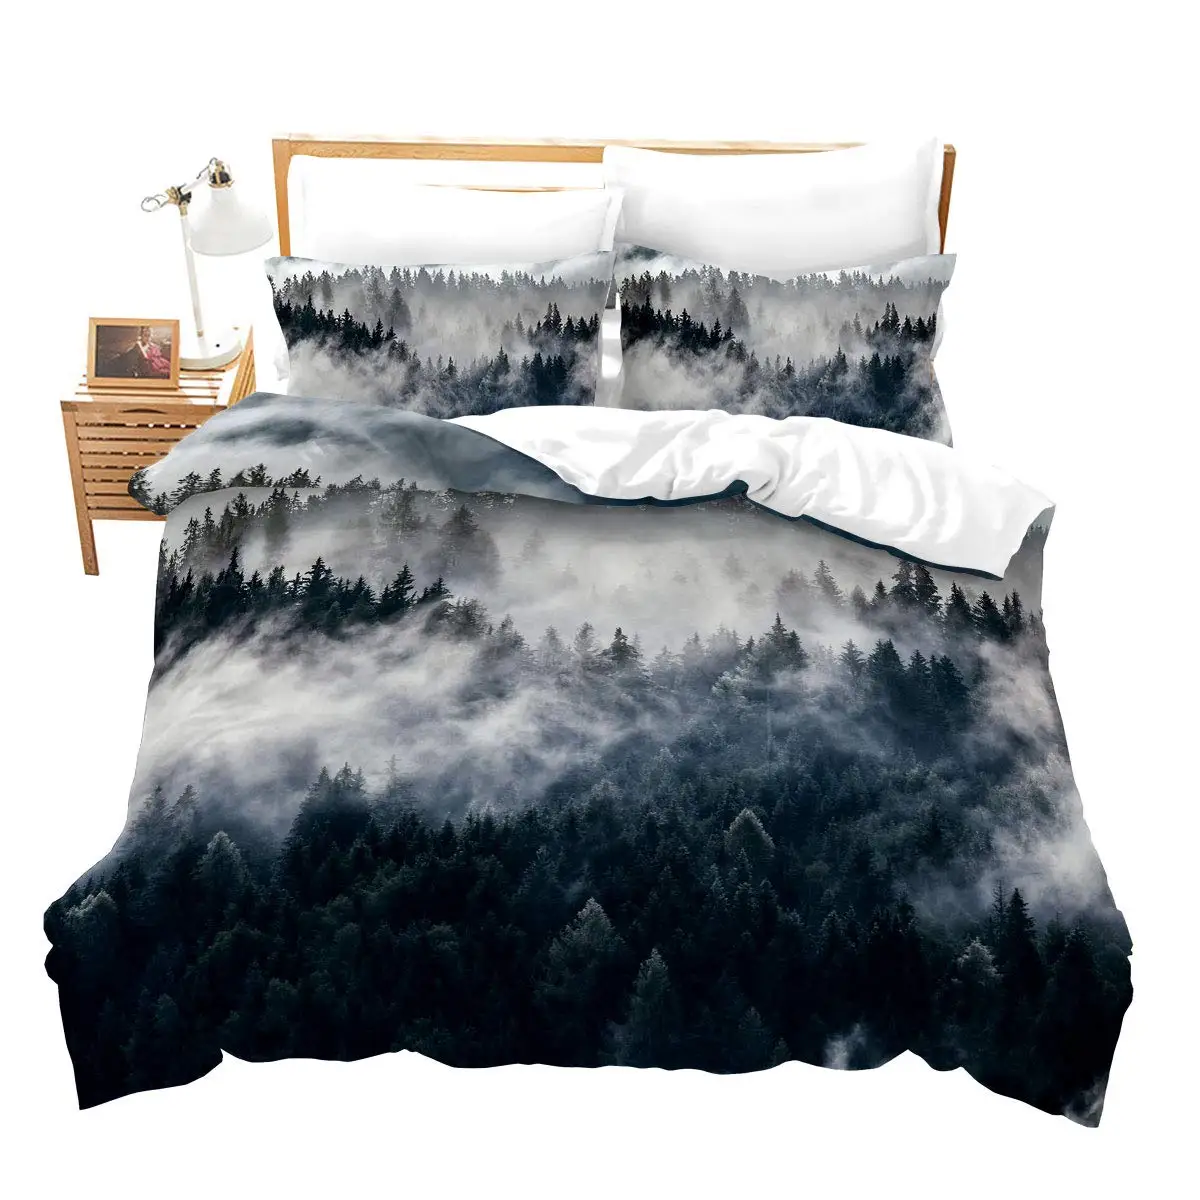 

Mountain Bedding Set Forest Duvet Cover Queen/King Size,Nature Scene Grey Trees Art Folk Style 2/3pcs Polyester Comforter Cover